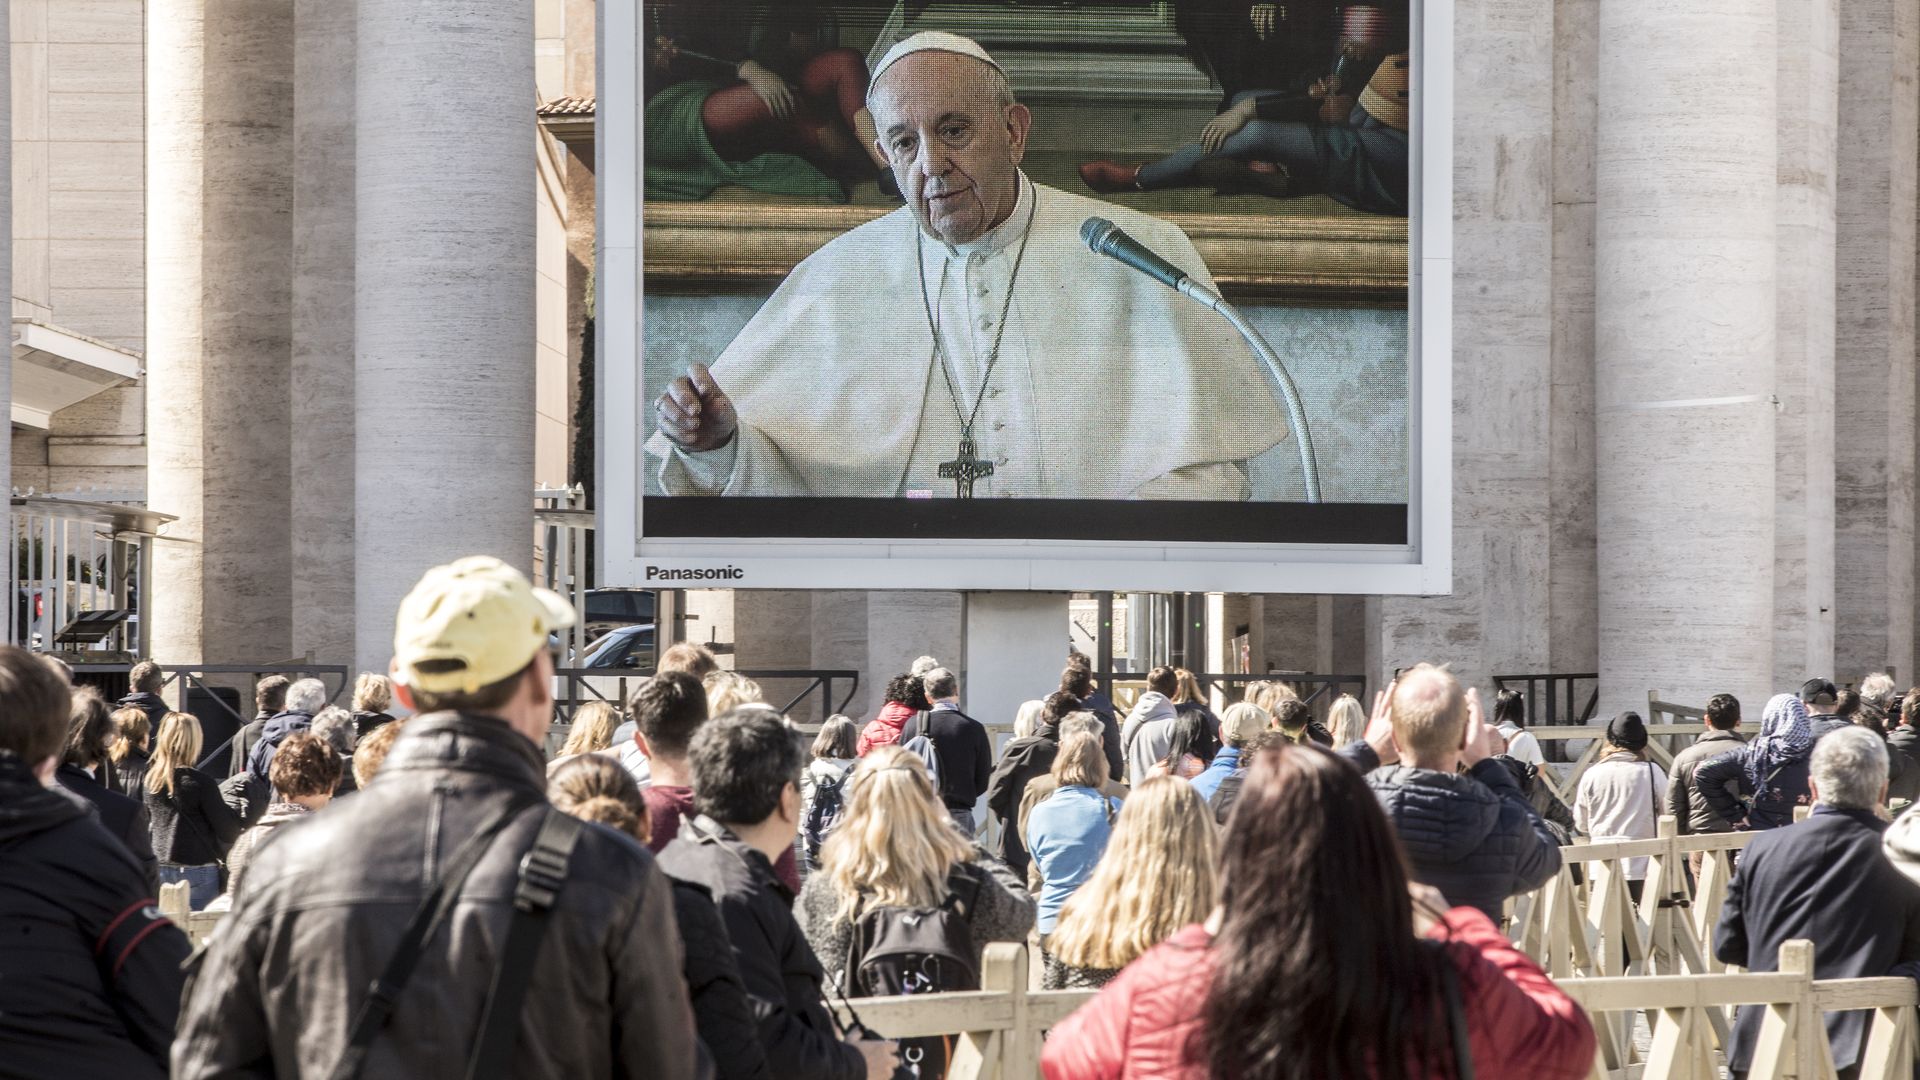 Pope Francis live-streaming his Sunday blessing to people in St. Peter's Square